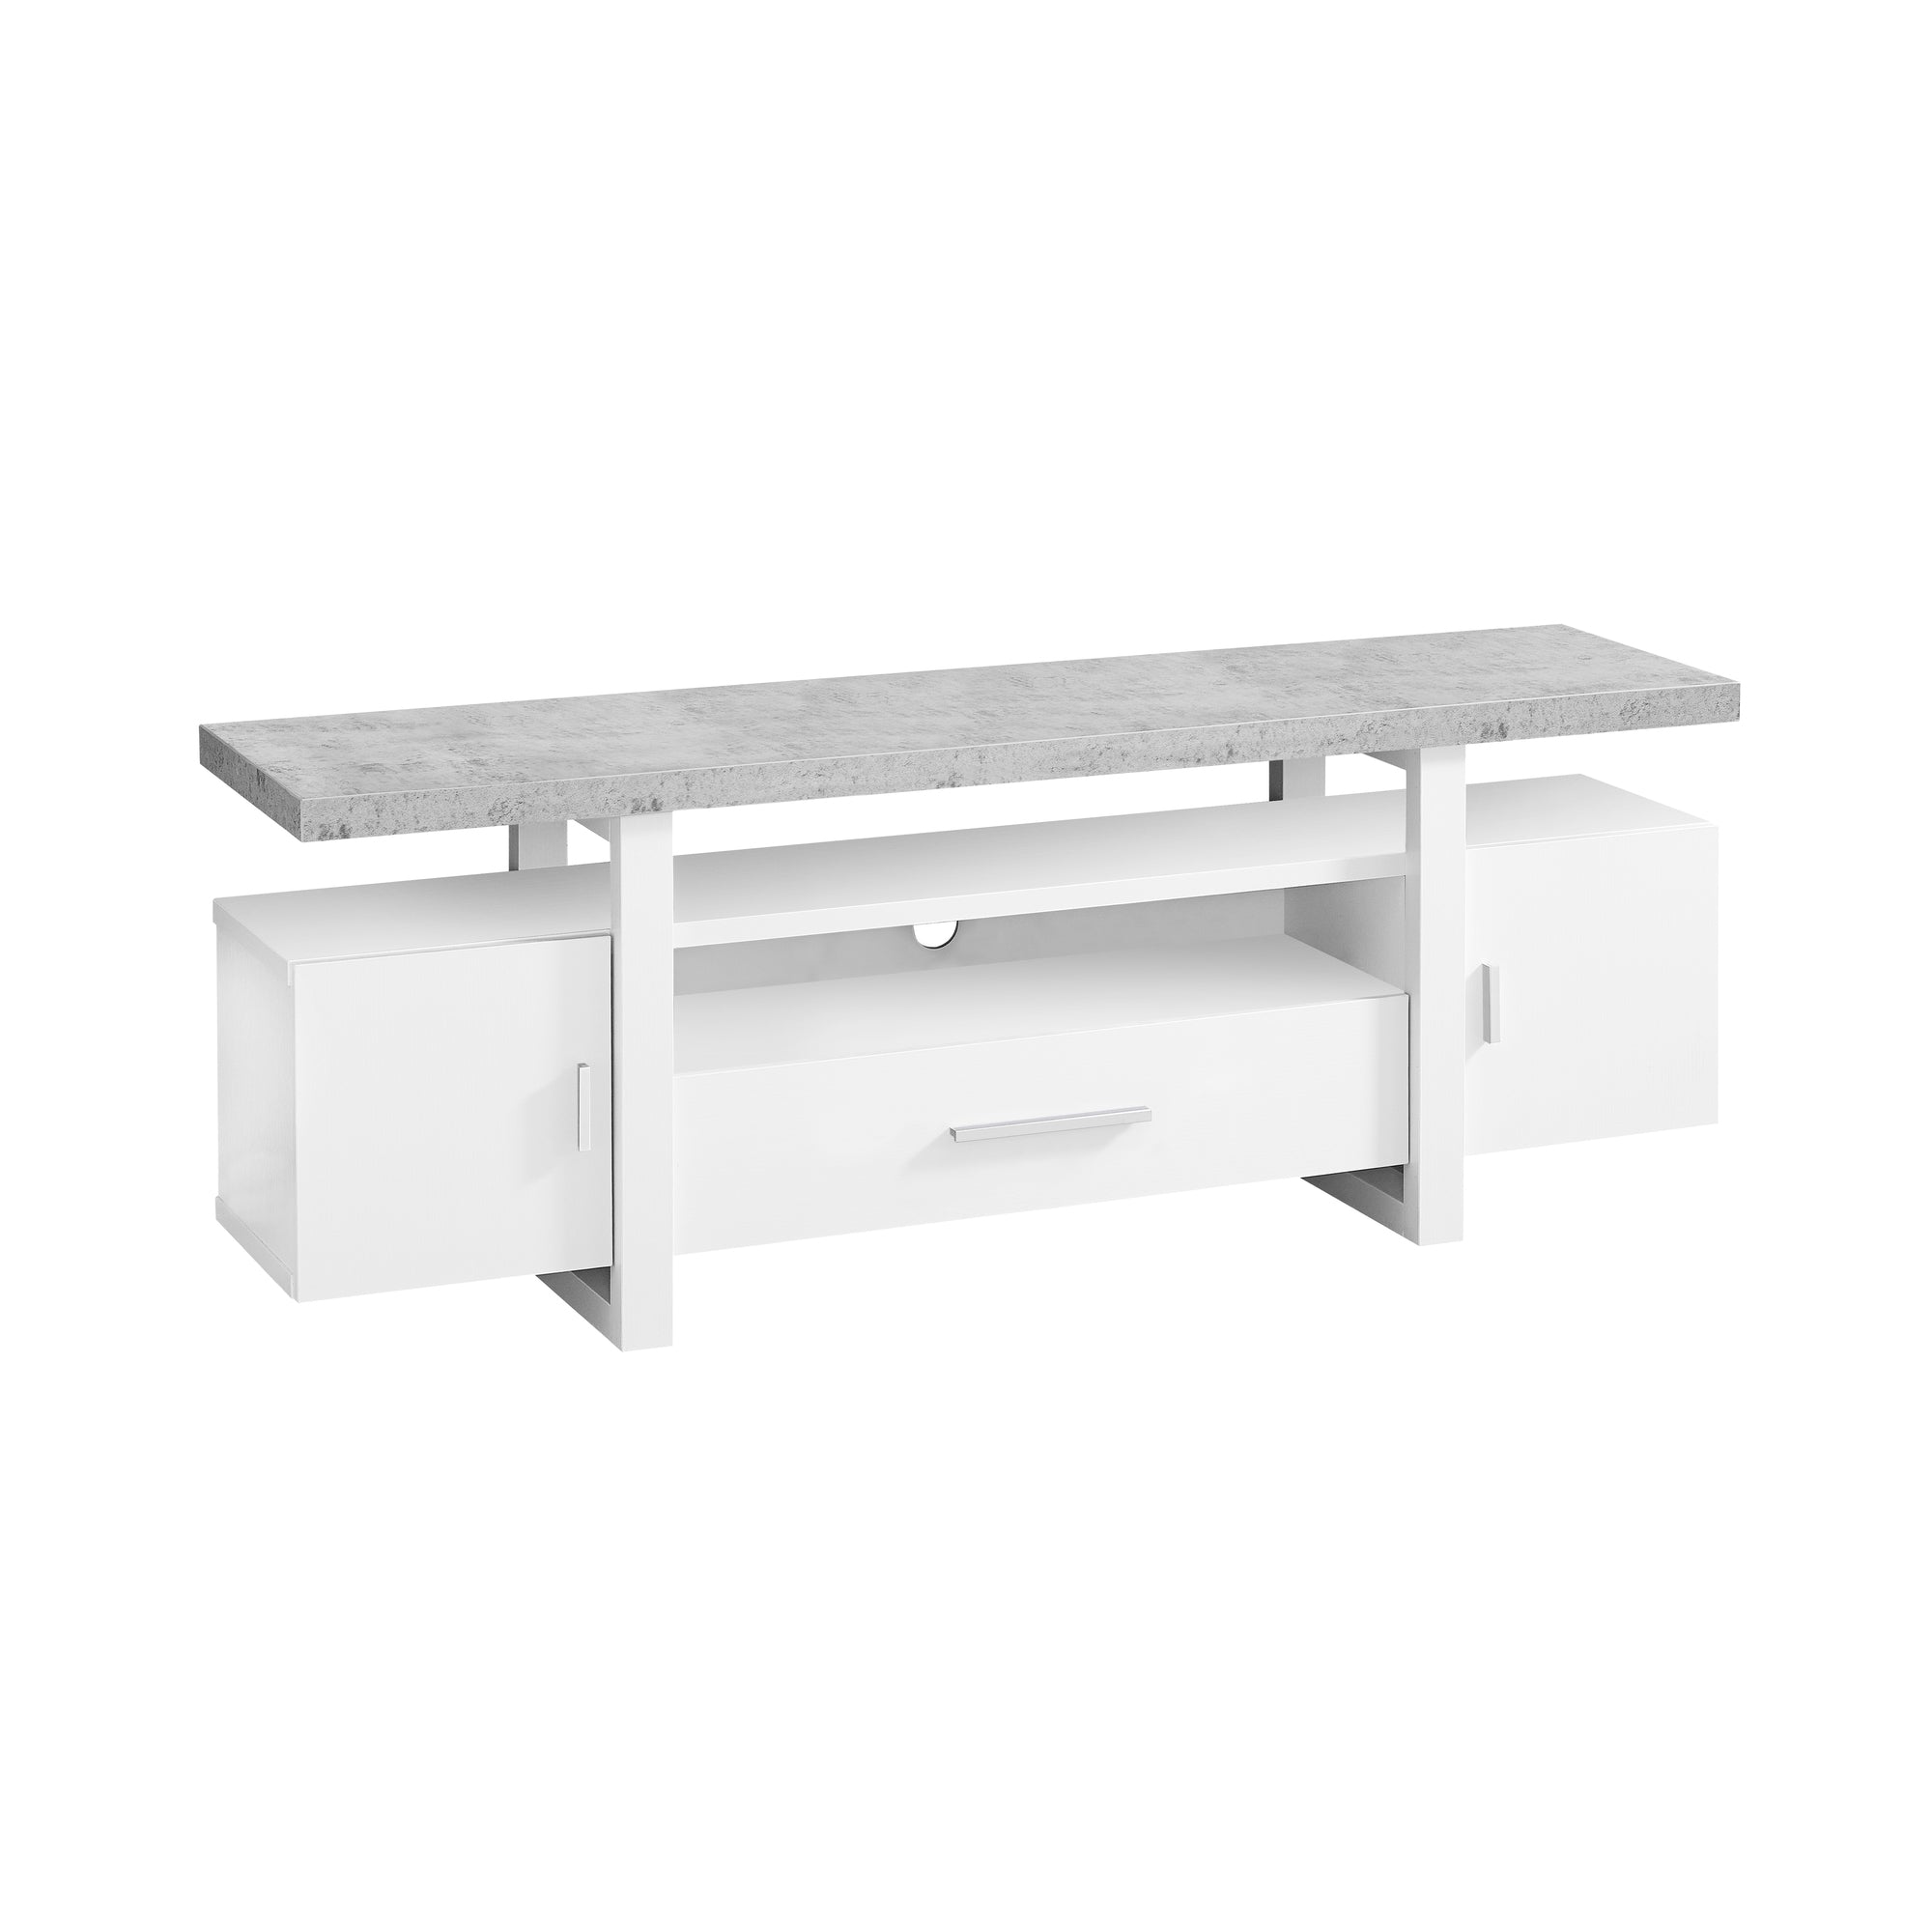 TV STAND - 60"L / WHITE / CEMENT-LOOK TOP